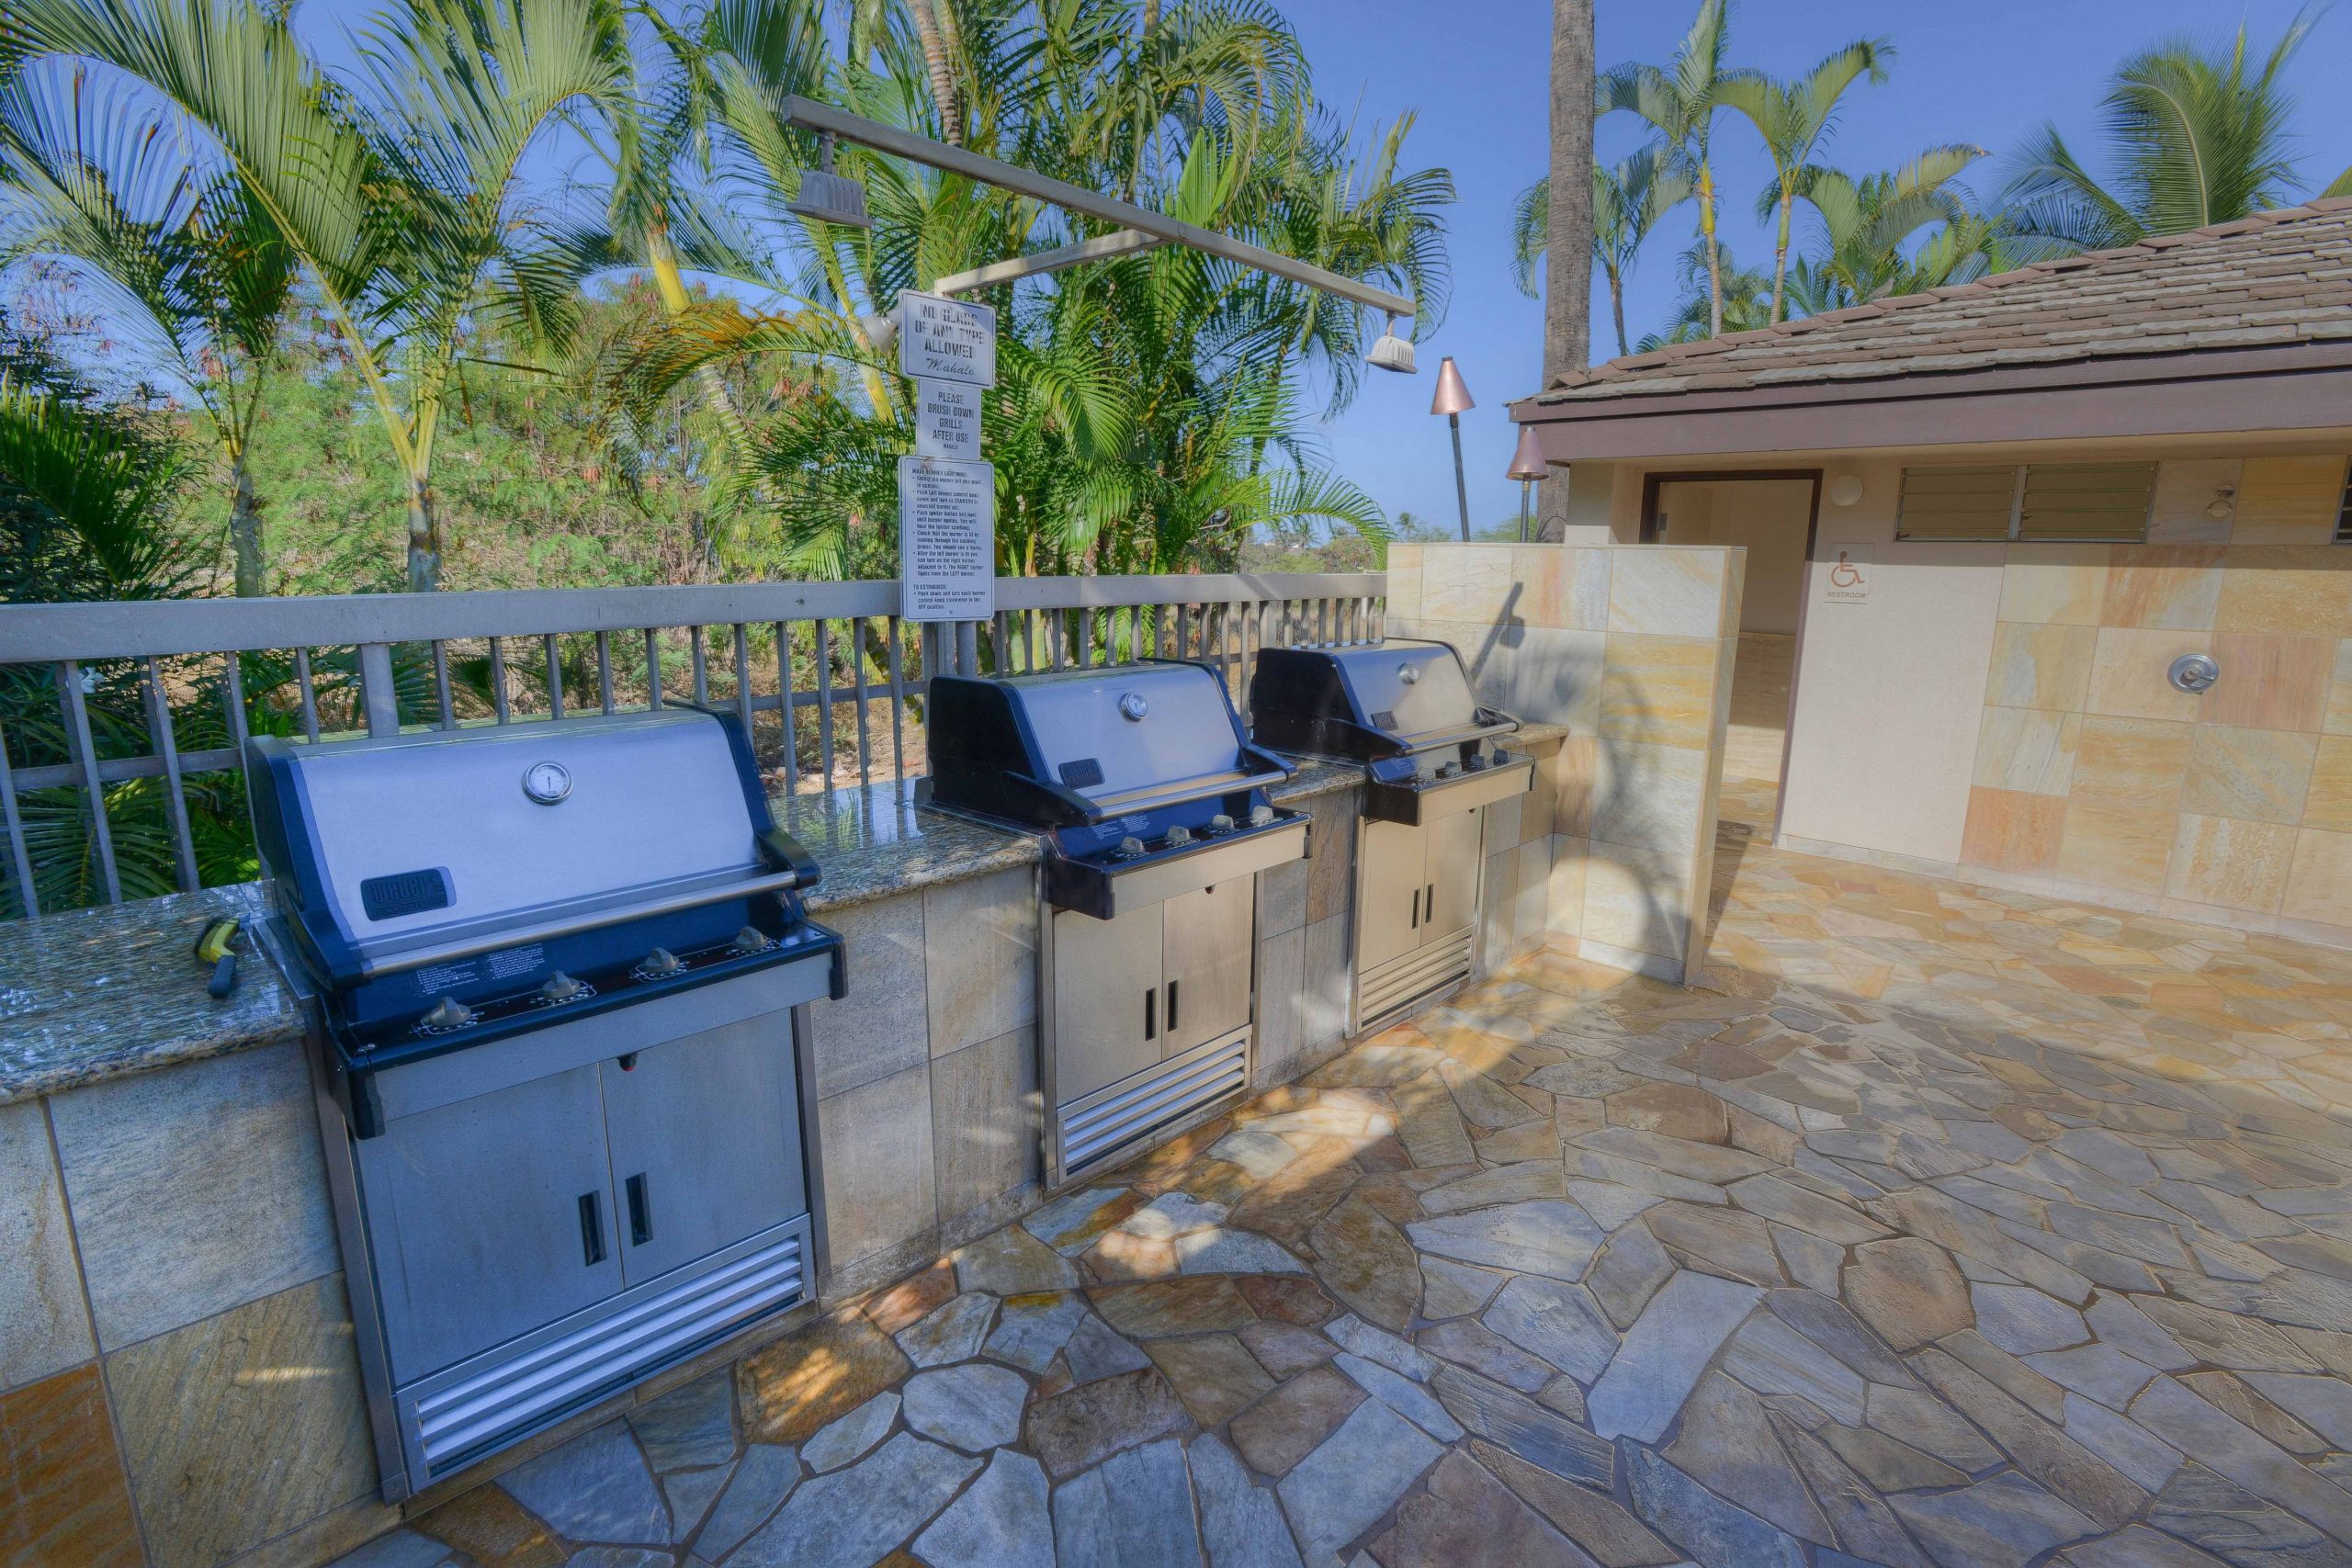 Guest-Use Grilling Station